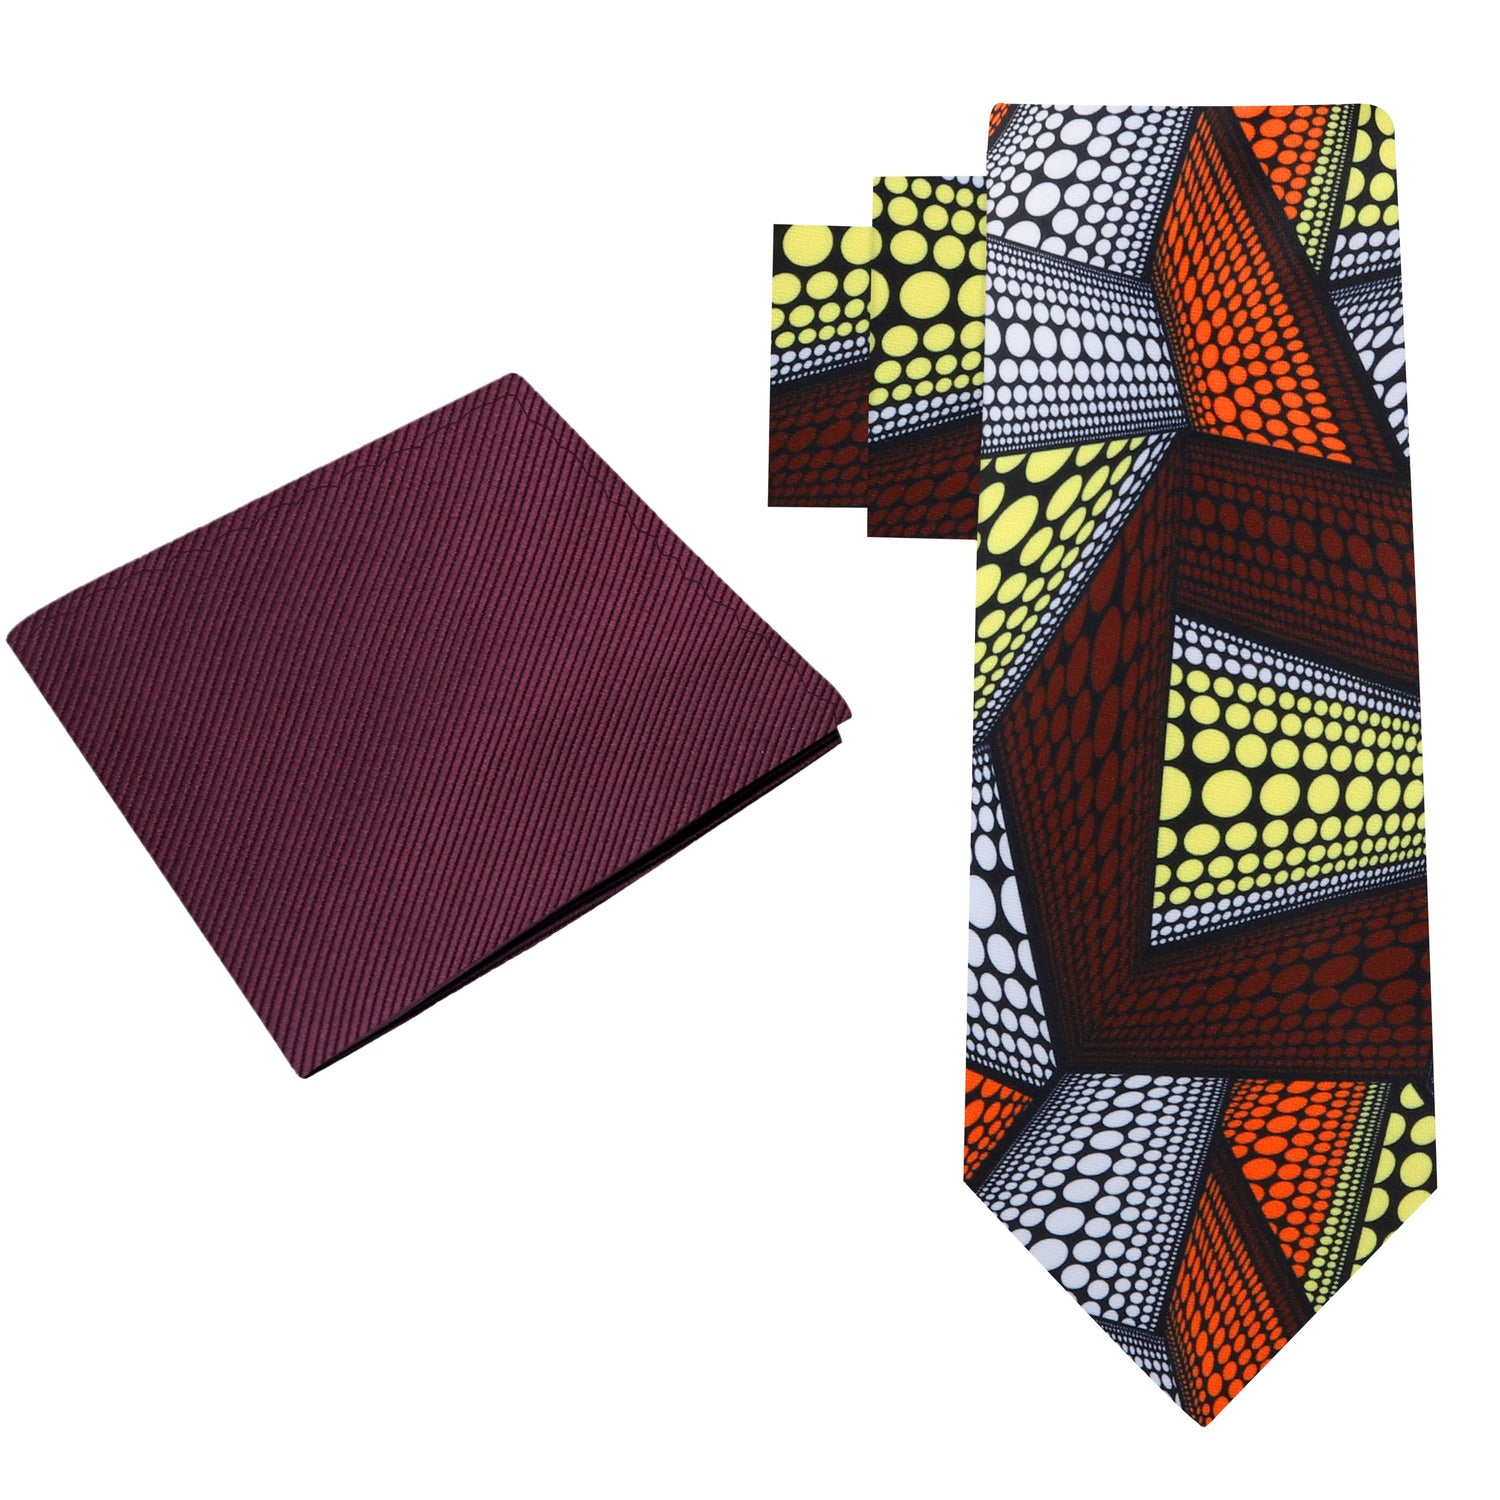 Alt View: Deep Red Orange White and Yellow Abstract Necktie and Deep Red Square